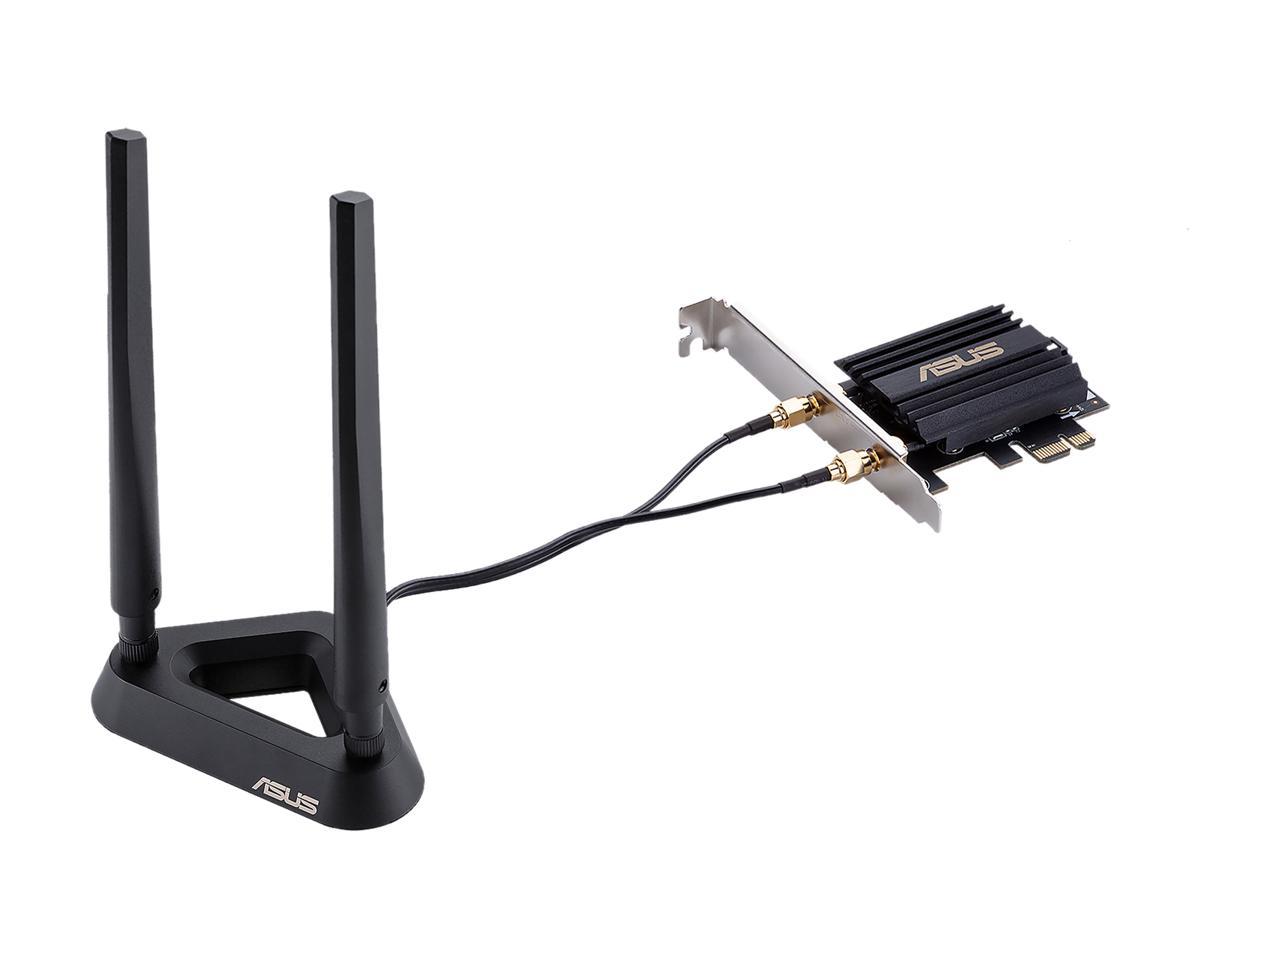 ASUS AX3000 (PCE-AX58BT) Next-Gen WiFi 6 Dual Band PCIe Wireless Adapter with Bluetooth 5.0 - OFDMA, 2x2 MU-MIMO and WPA3 Security - image 4 of 11